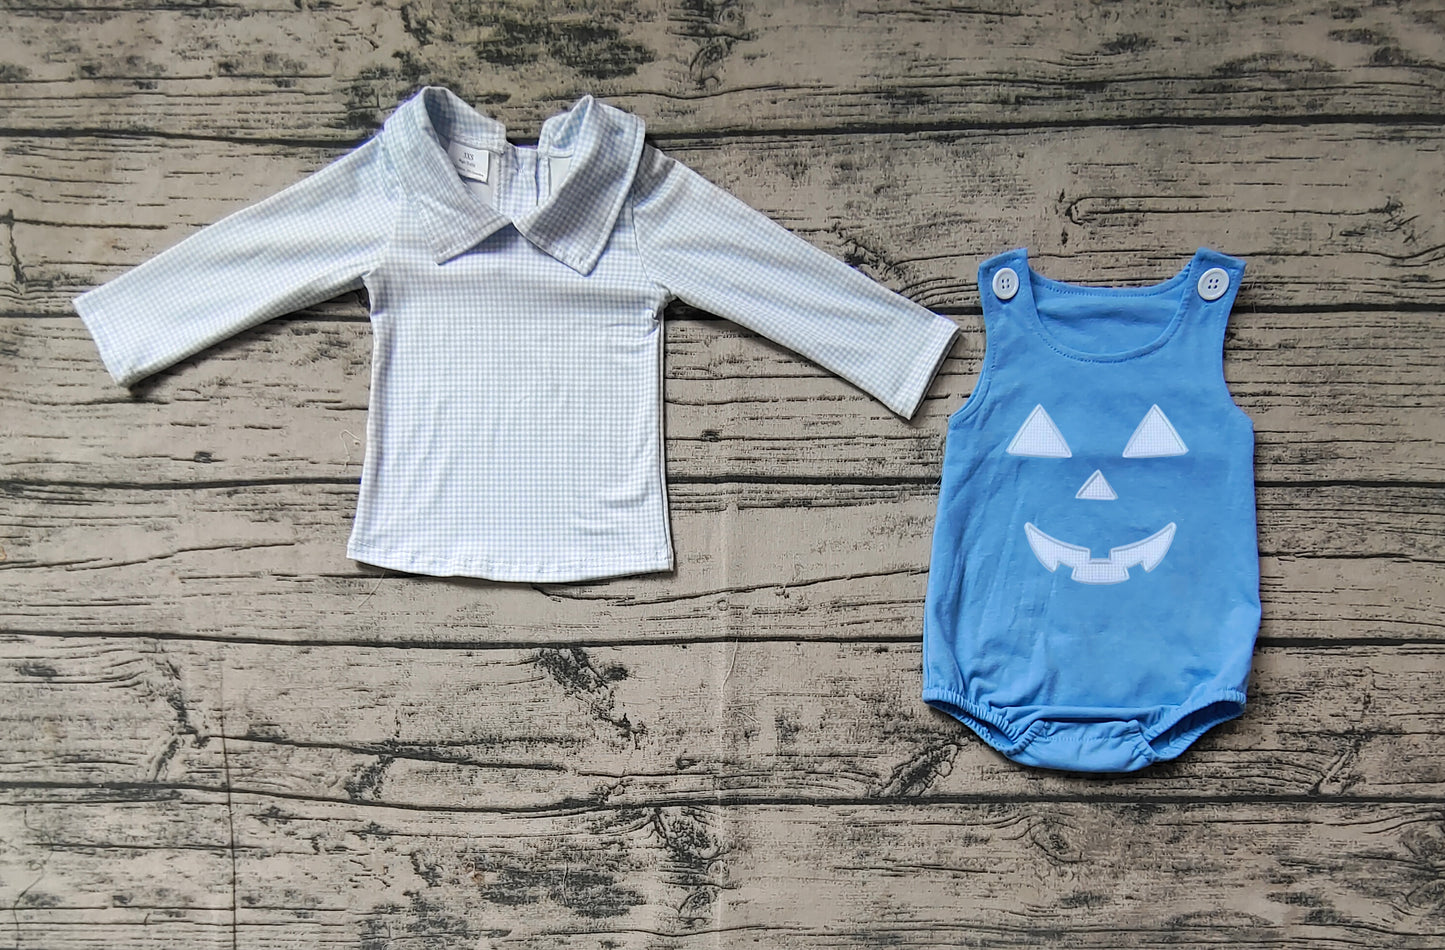 Baby Infant Blue Halloween Ghost Face 2pcs Shirt Rompers preorder